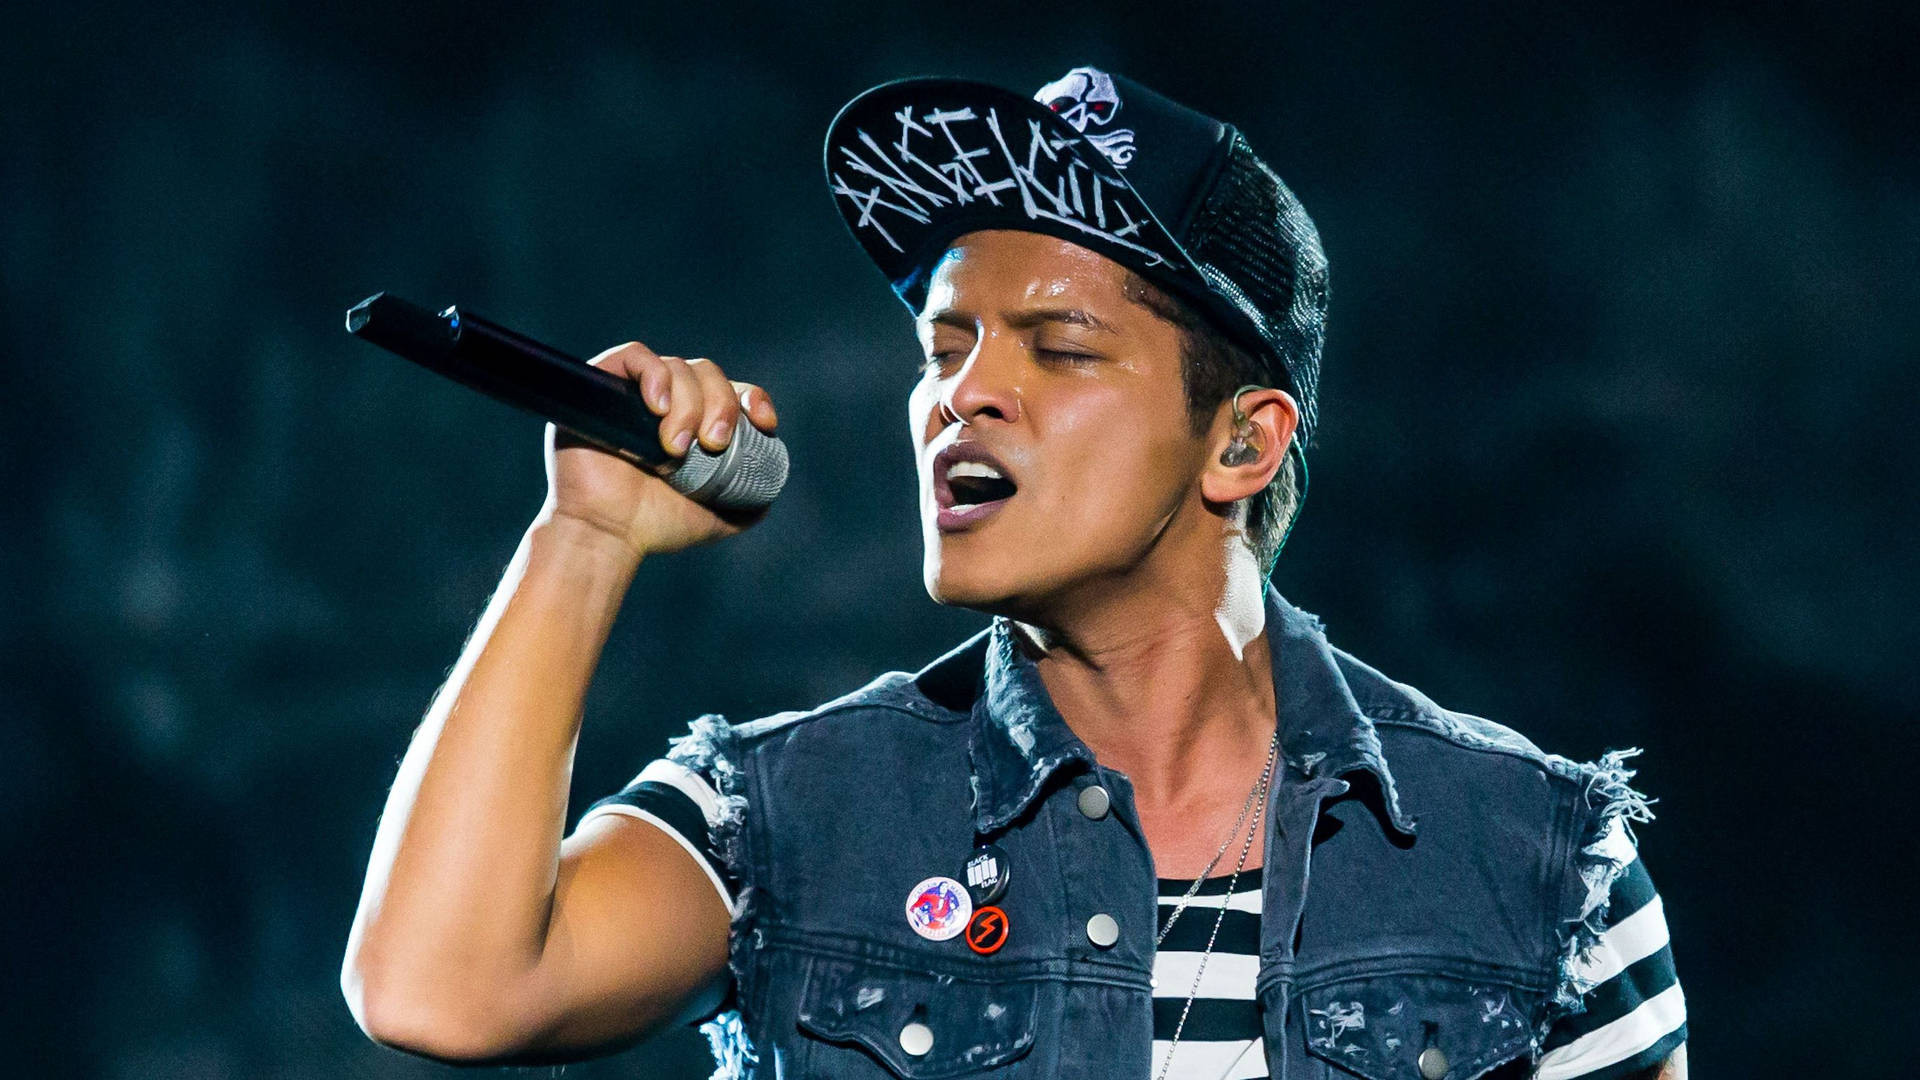 Bruno Mars performs his hit song "Just The Way You Are" live Wallpaper